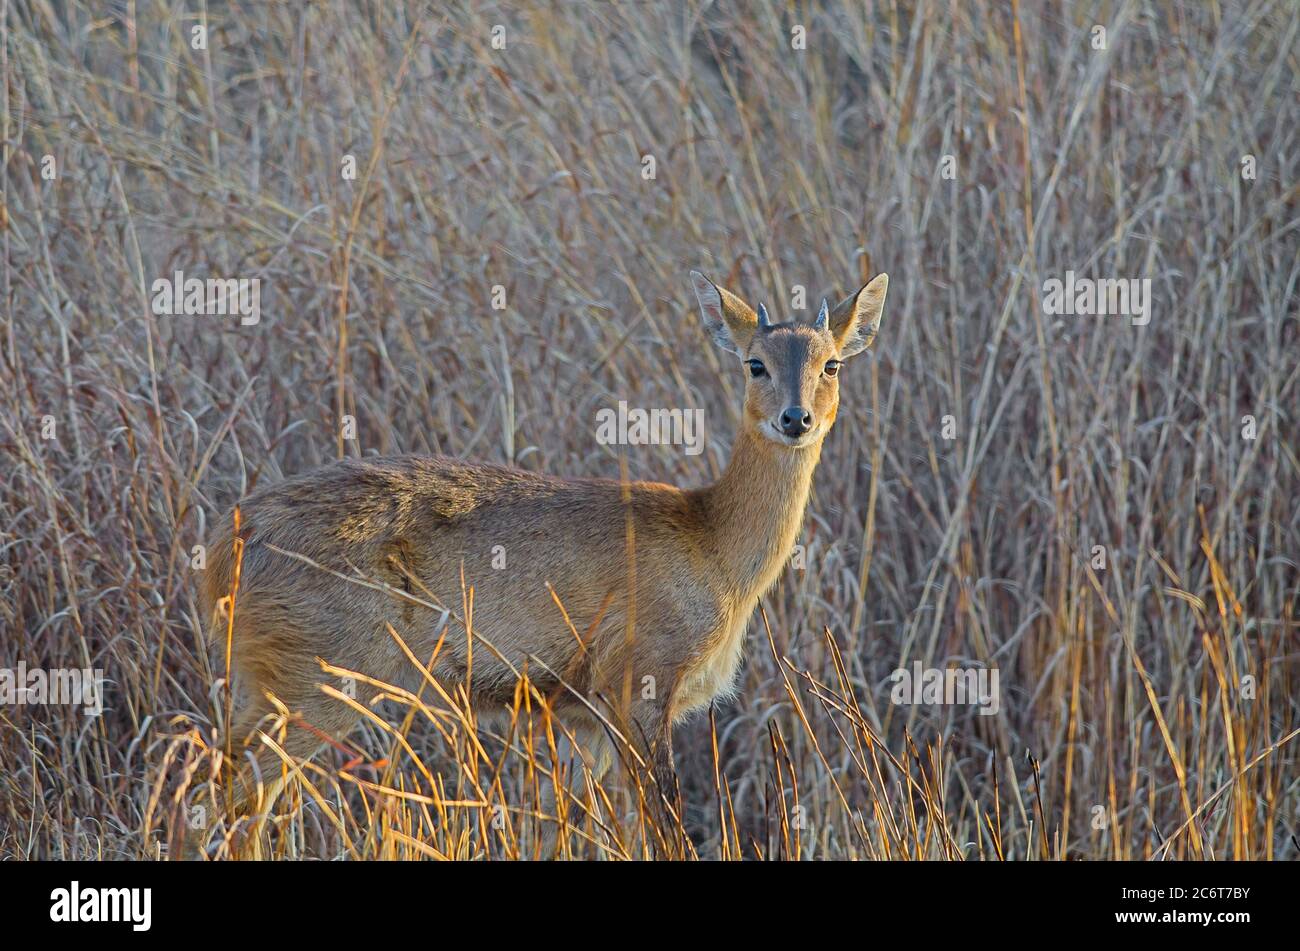 Four-horned antelope in a grassy meadow Stock Photo